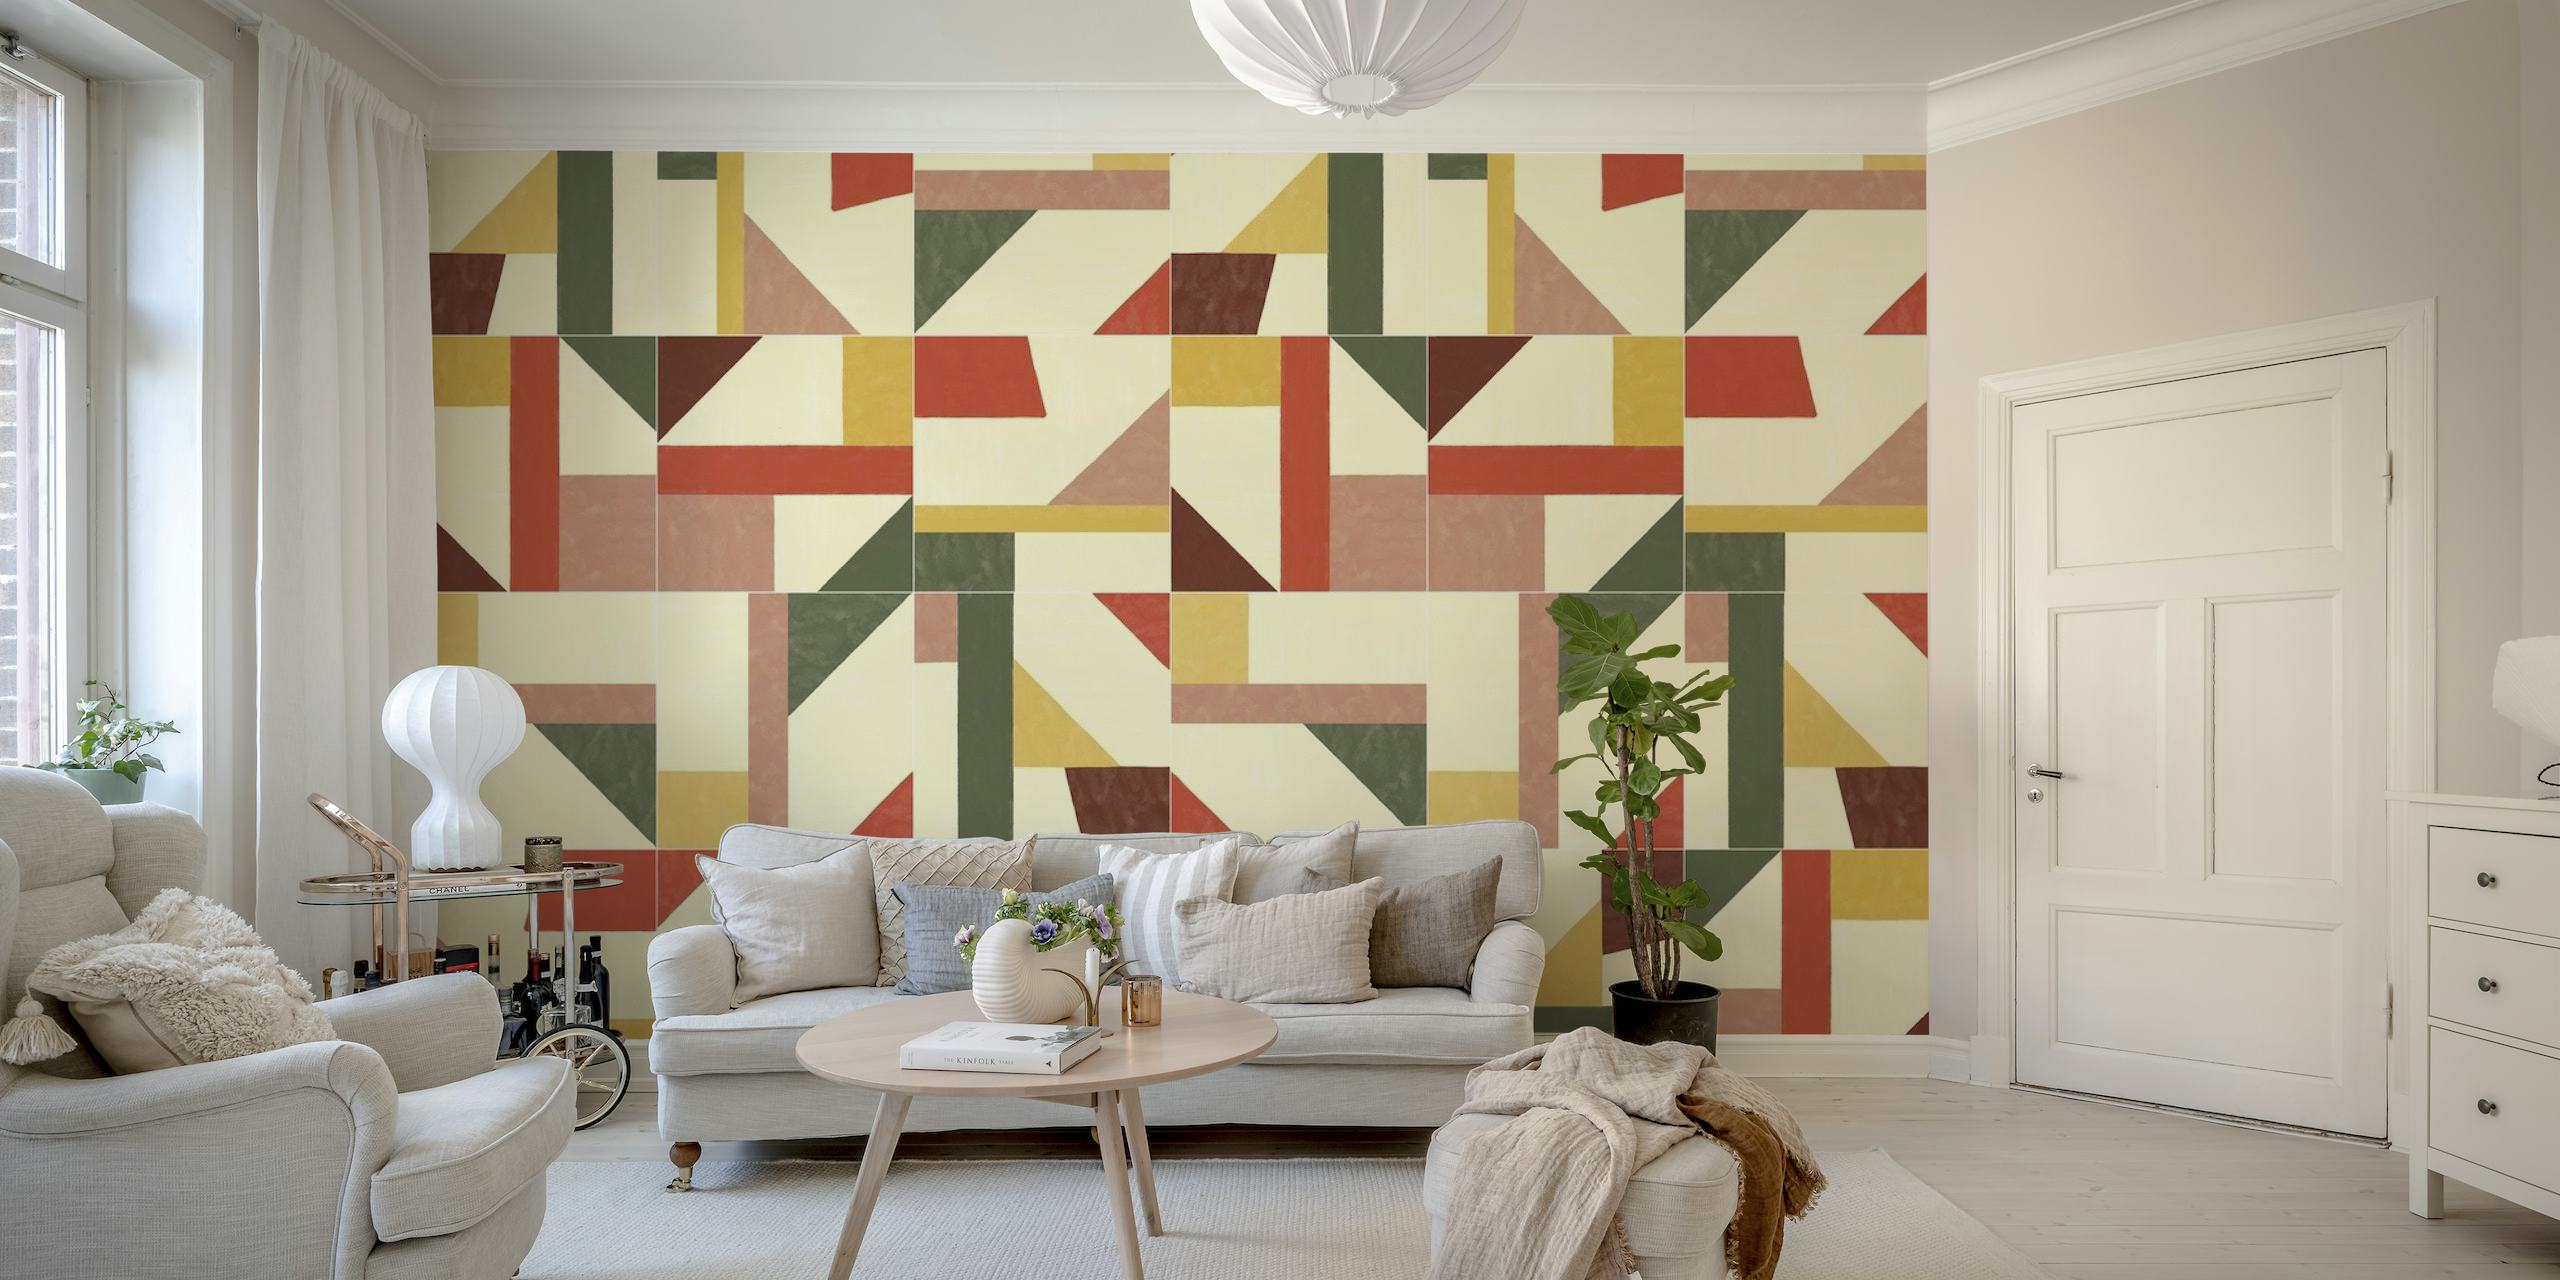 Tangram Wall Tiles Two ταπετσαρία